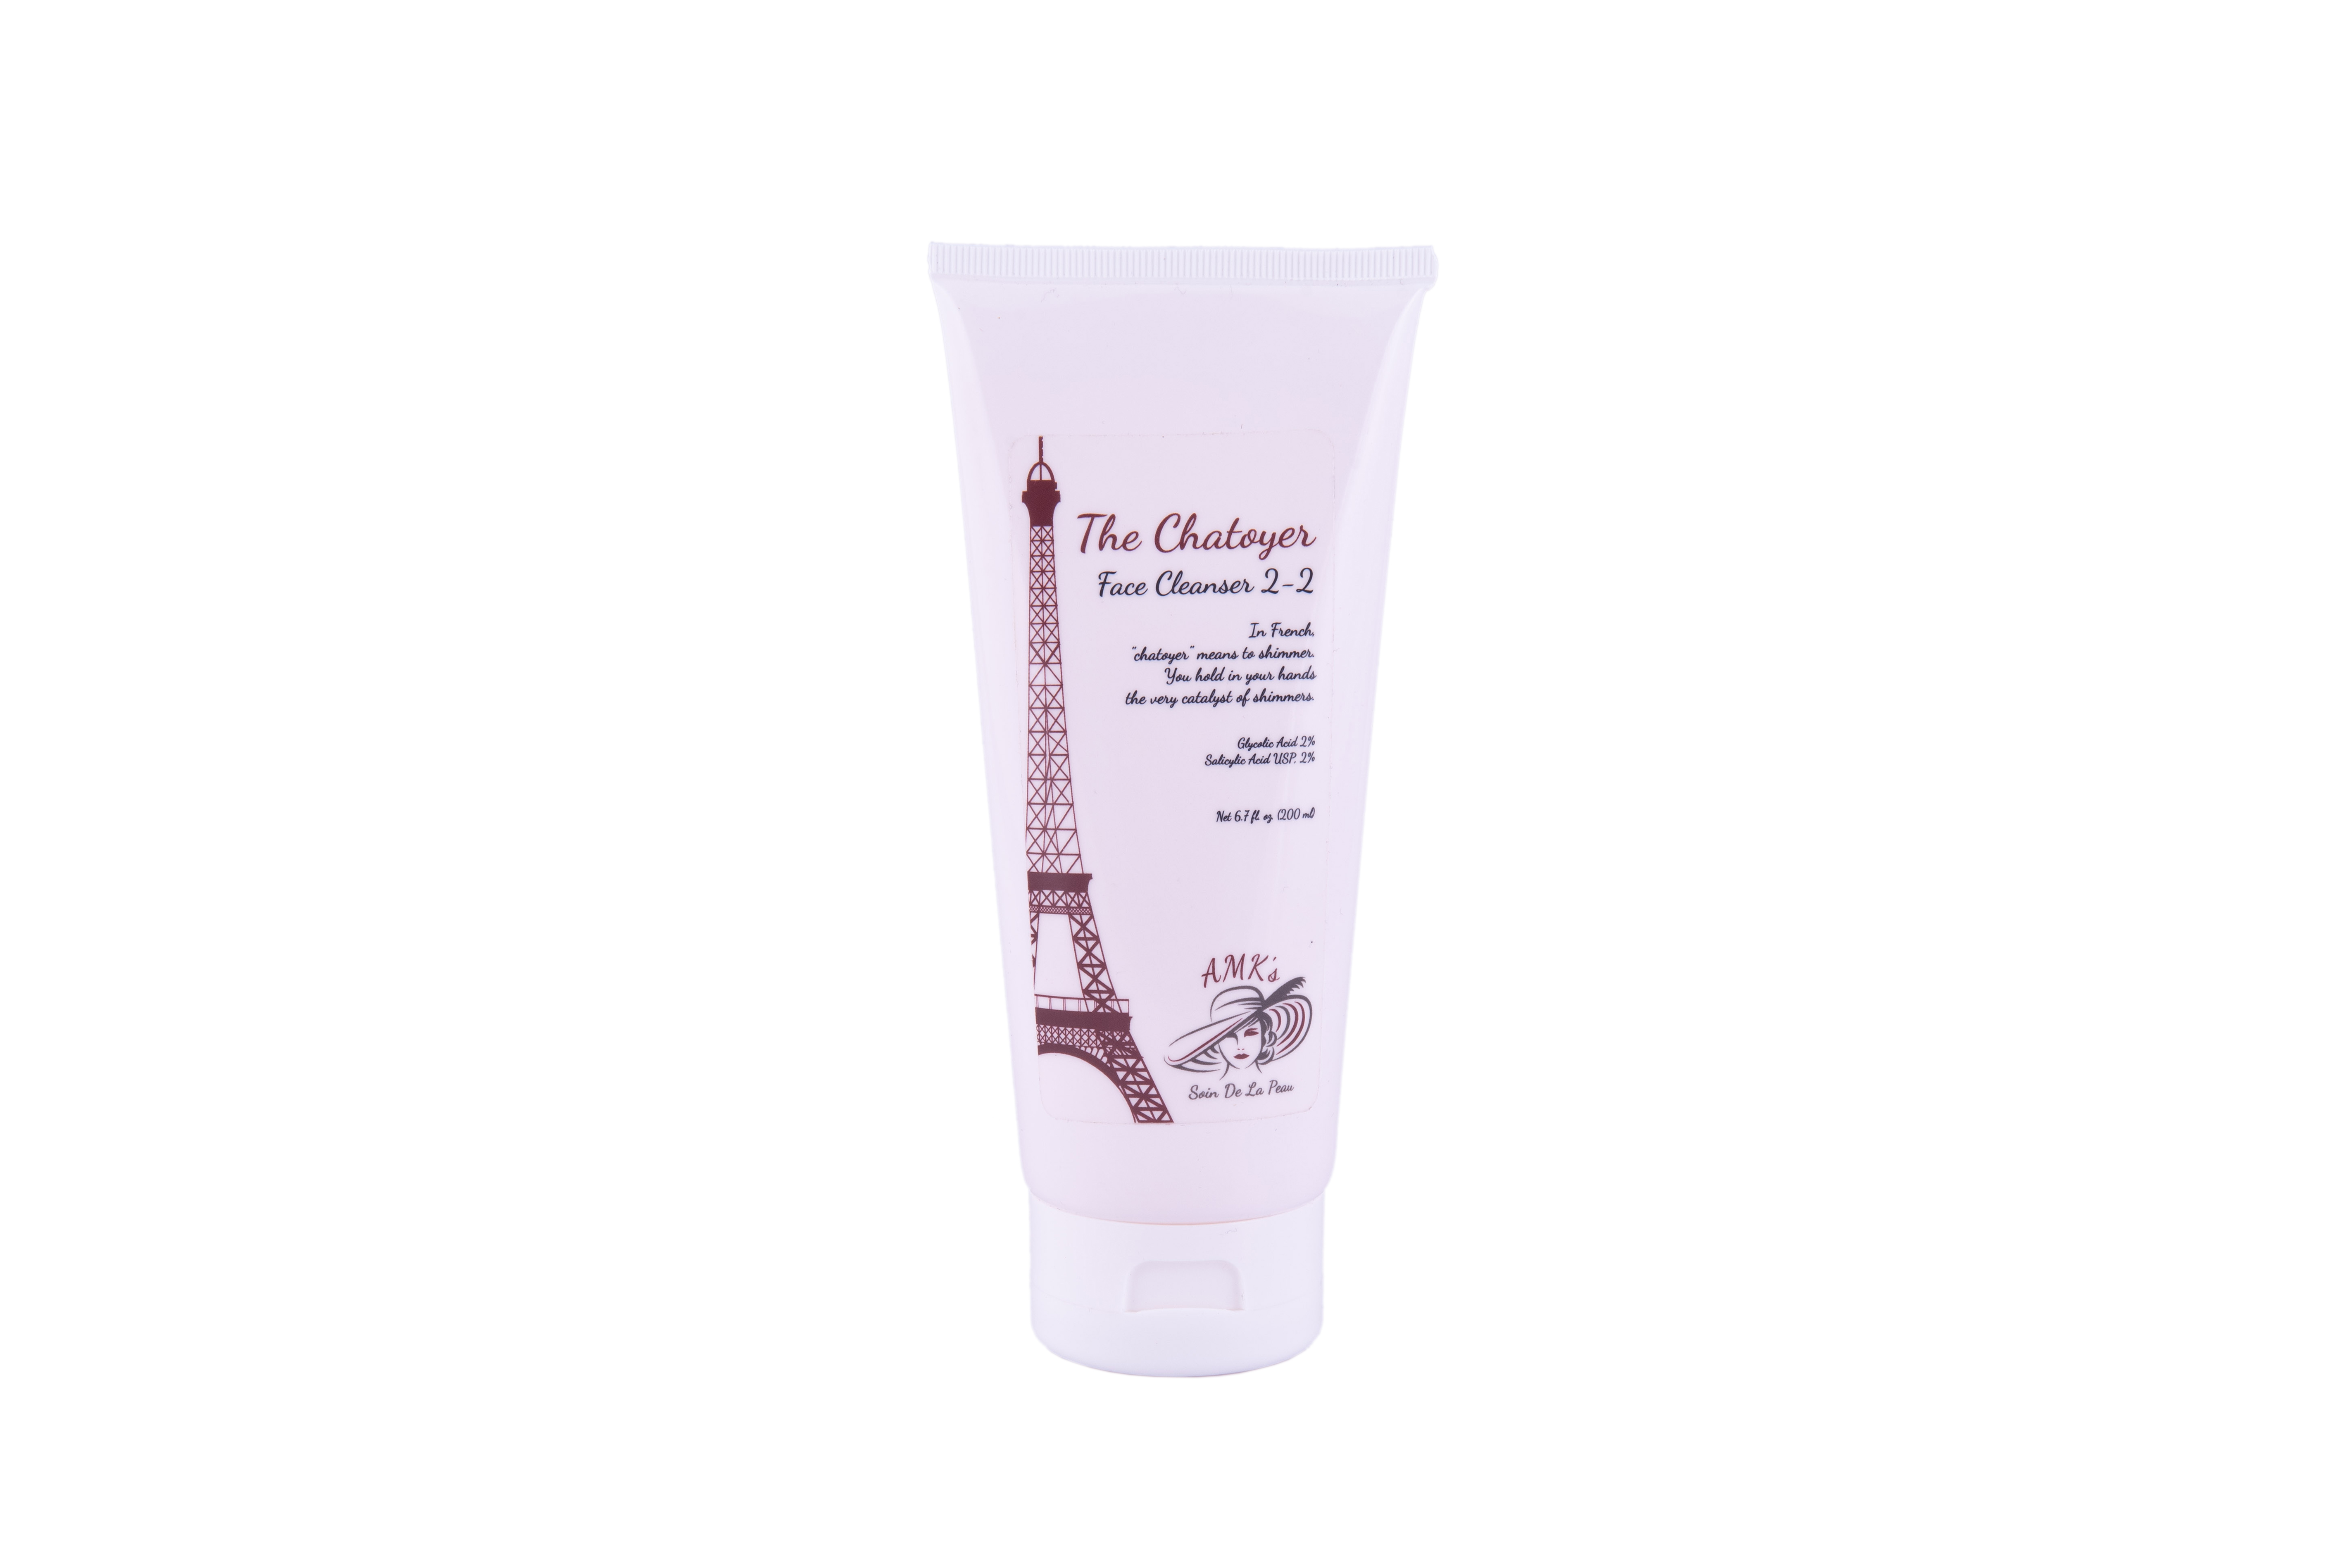 The Chatoyer Face Cleanser 2-2